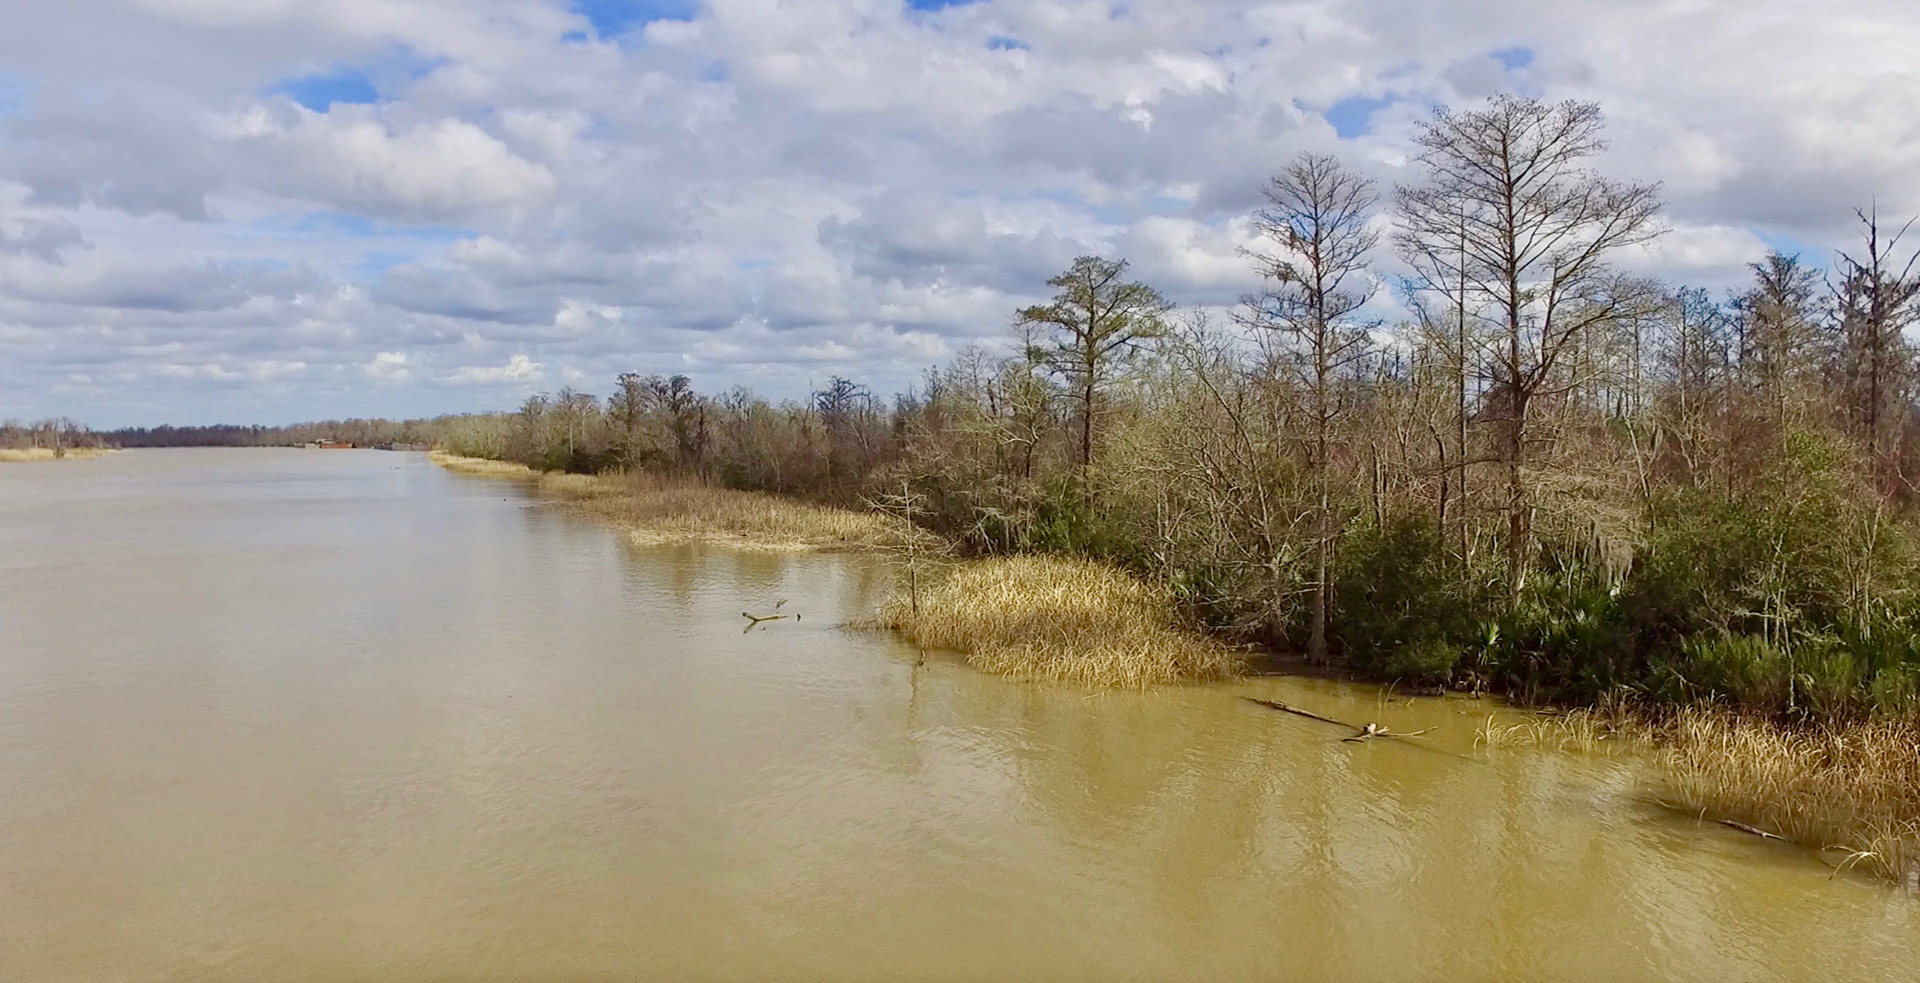 This is the stretch of shoreline where the Clotilda was discovered. It is in the Mobile River alongside 12-Mile Island. (Photograph by Ben Raines)